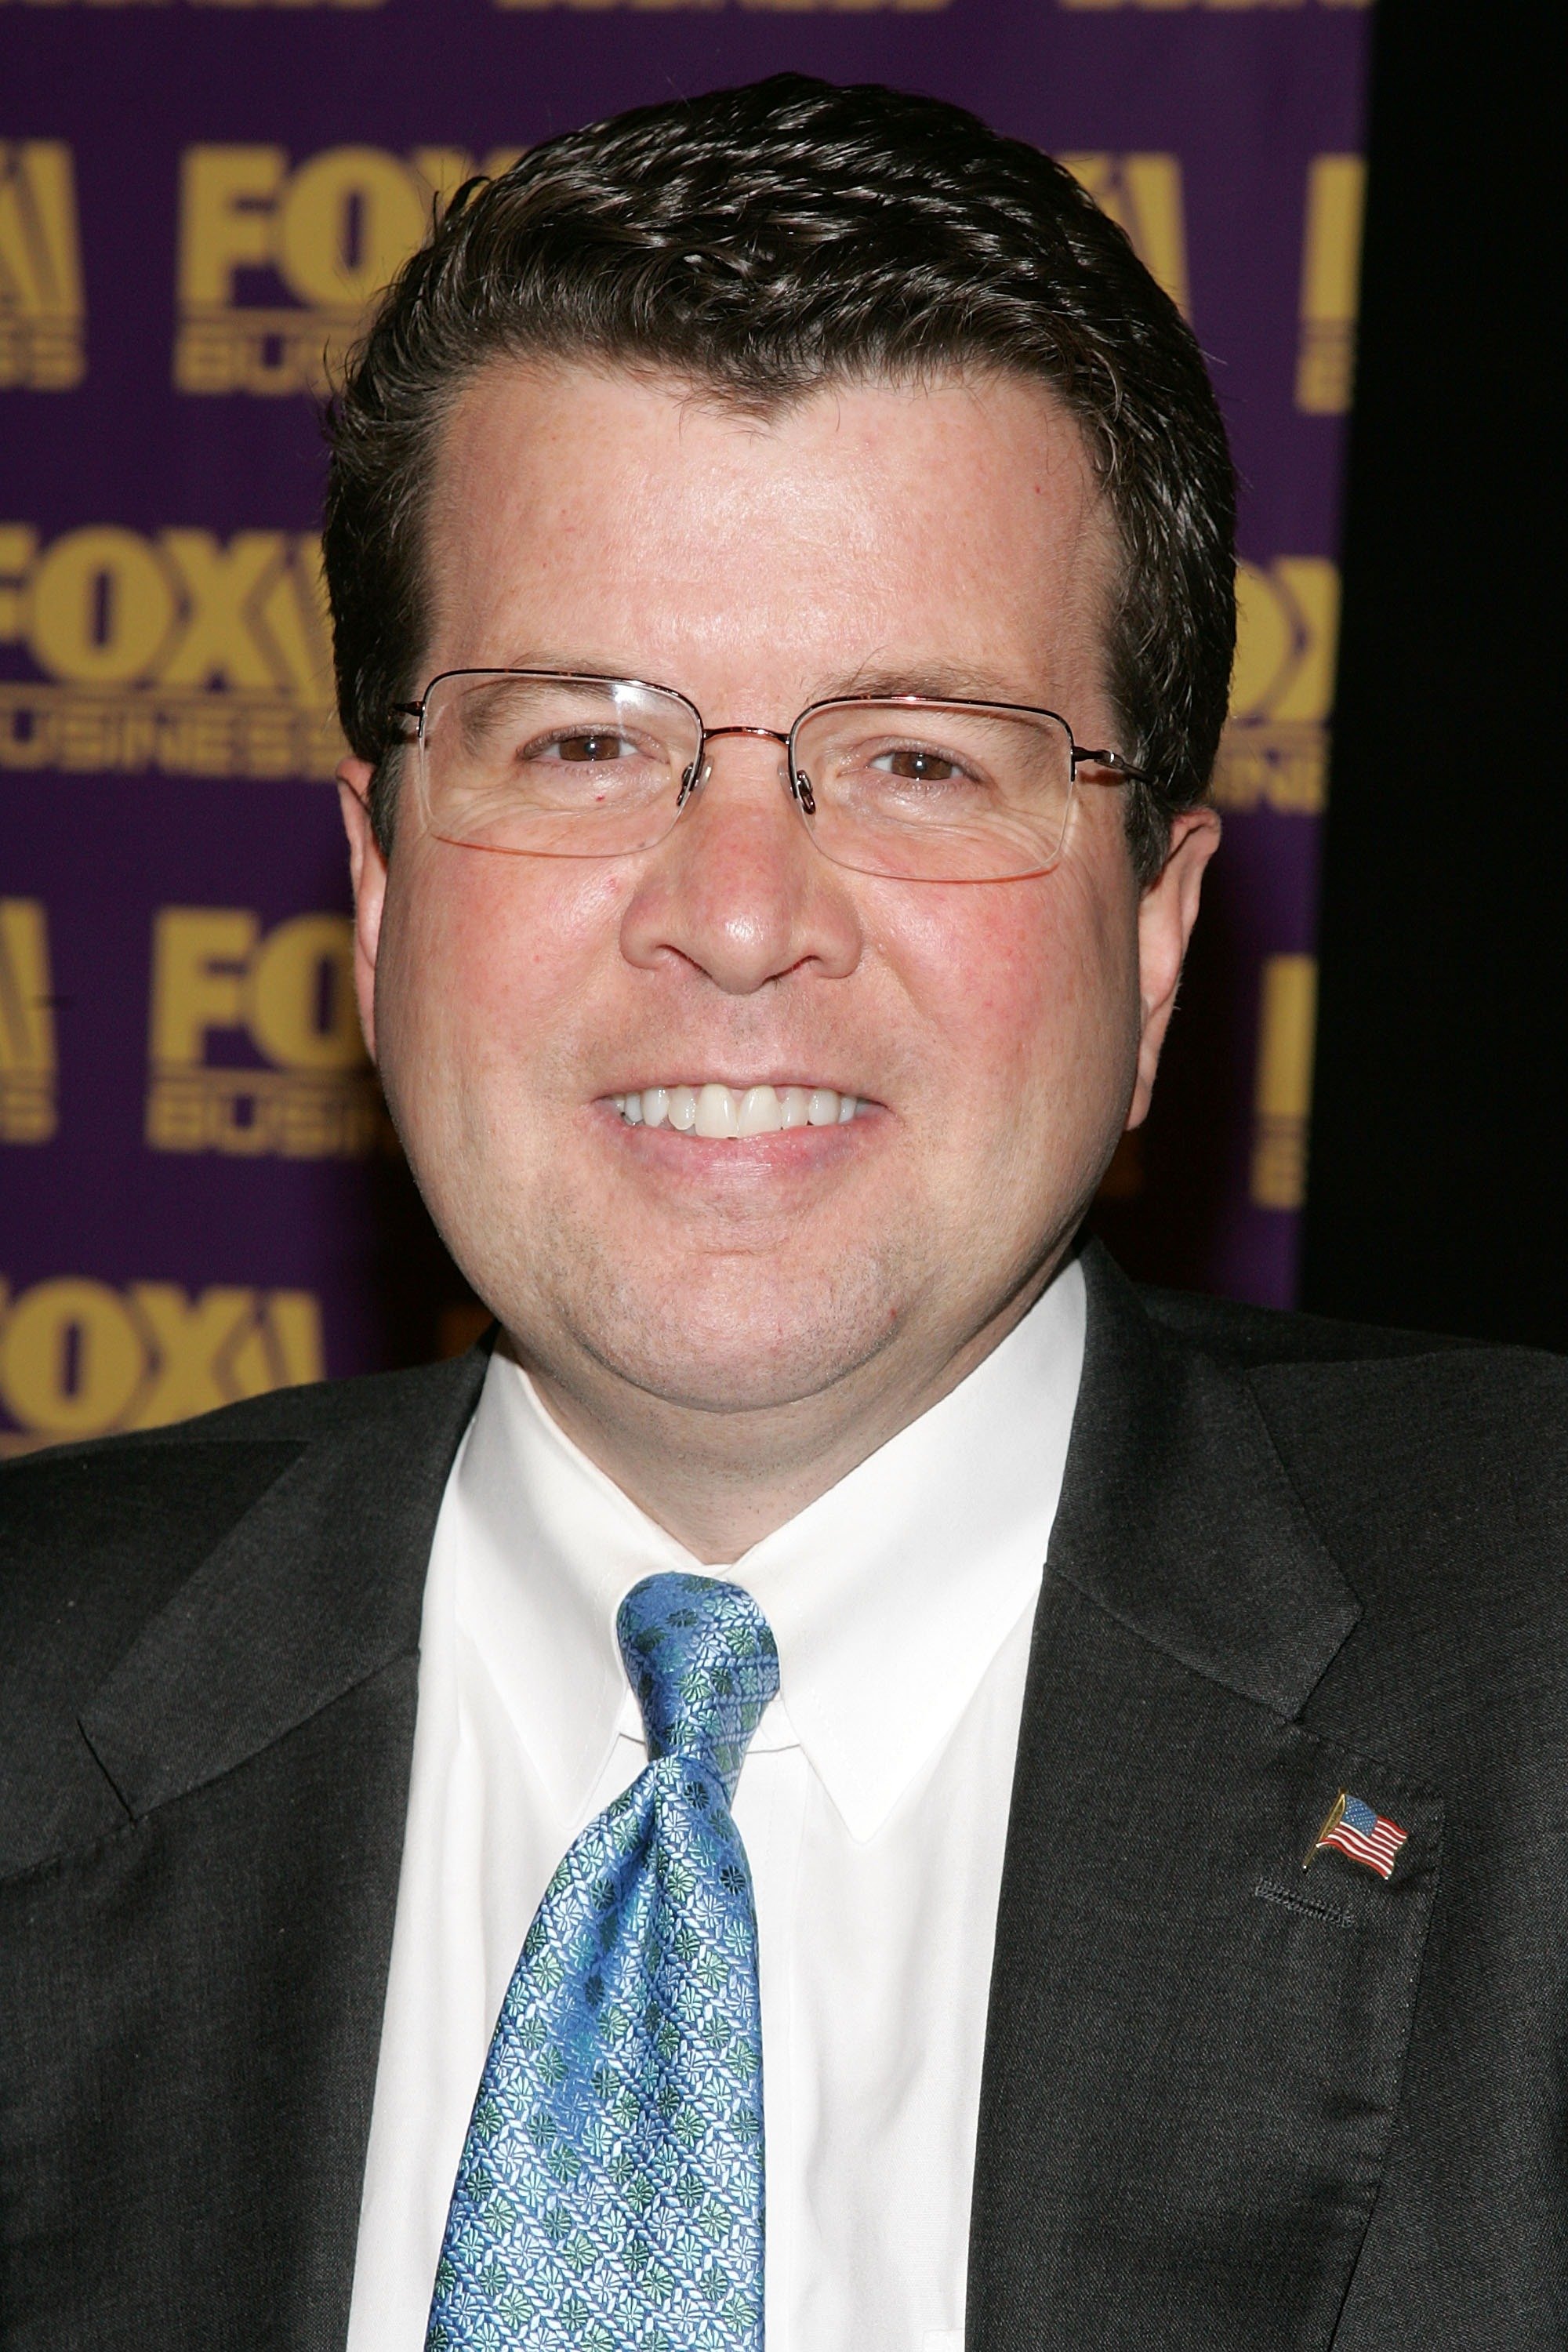 Neil Cavuto arrives at the Fox Business Network launch party at the Metropolitain Museum of Arts on October 24, 2007 in New York City. | Photo: Getty Images